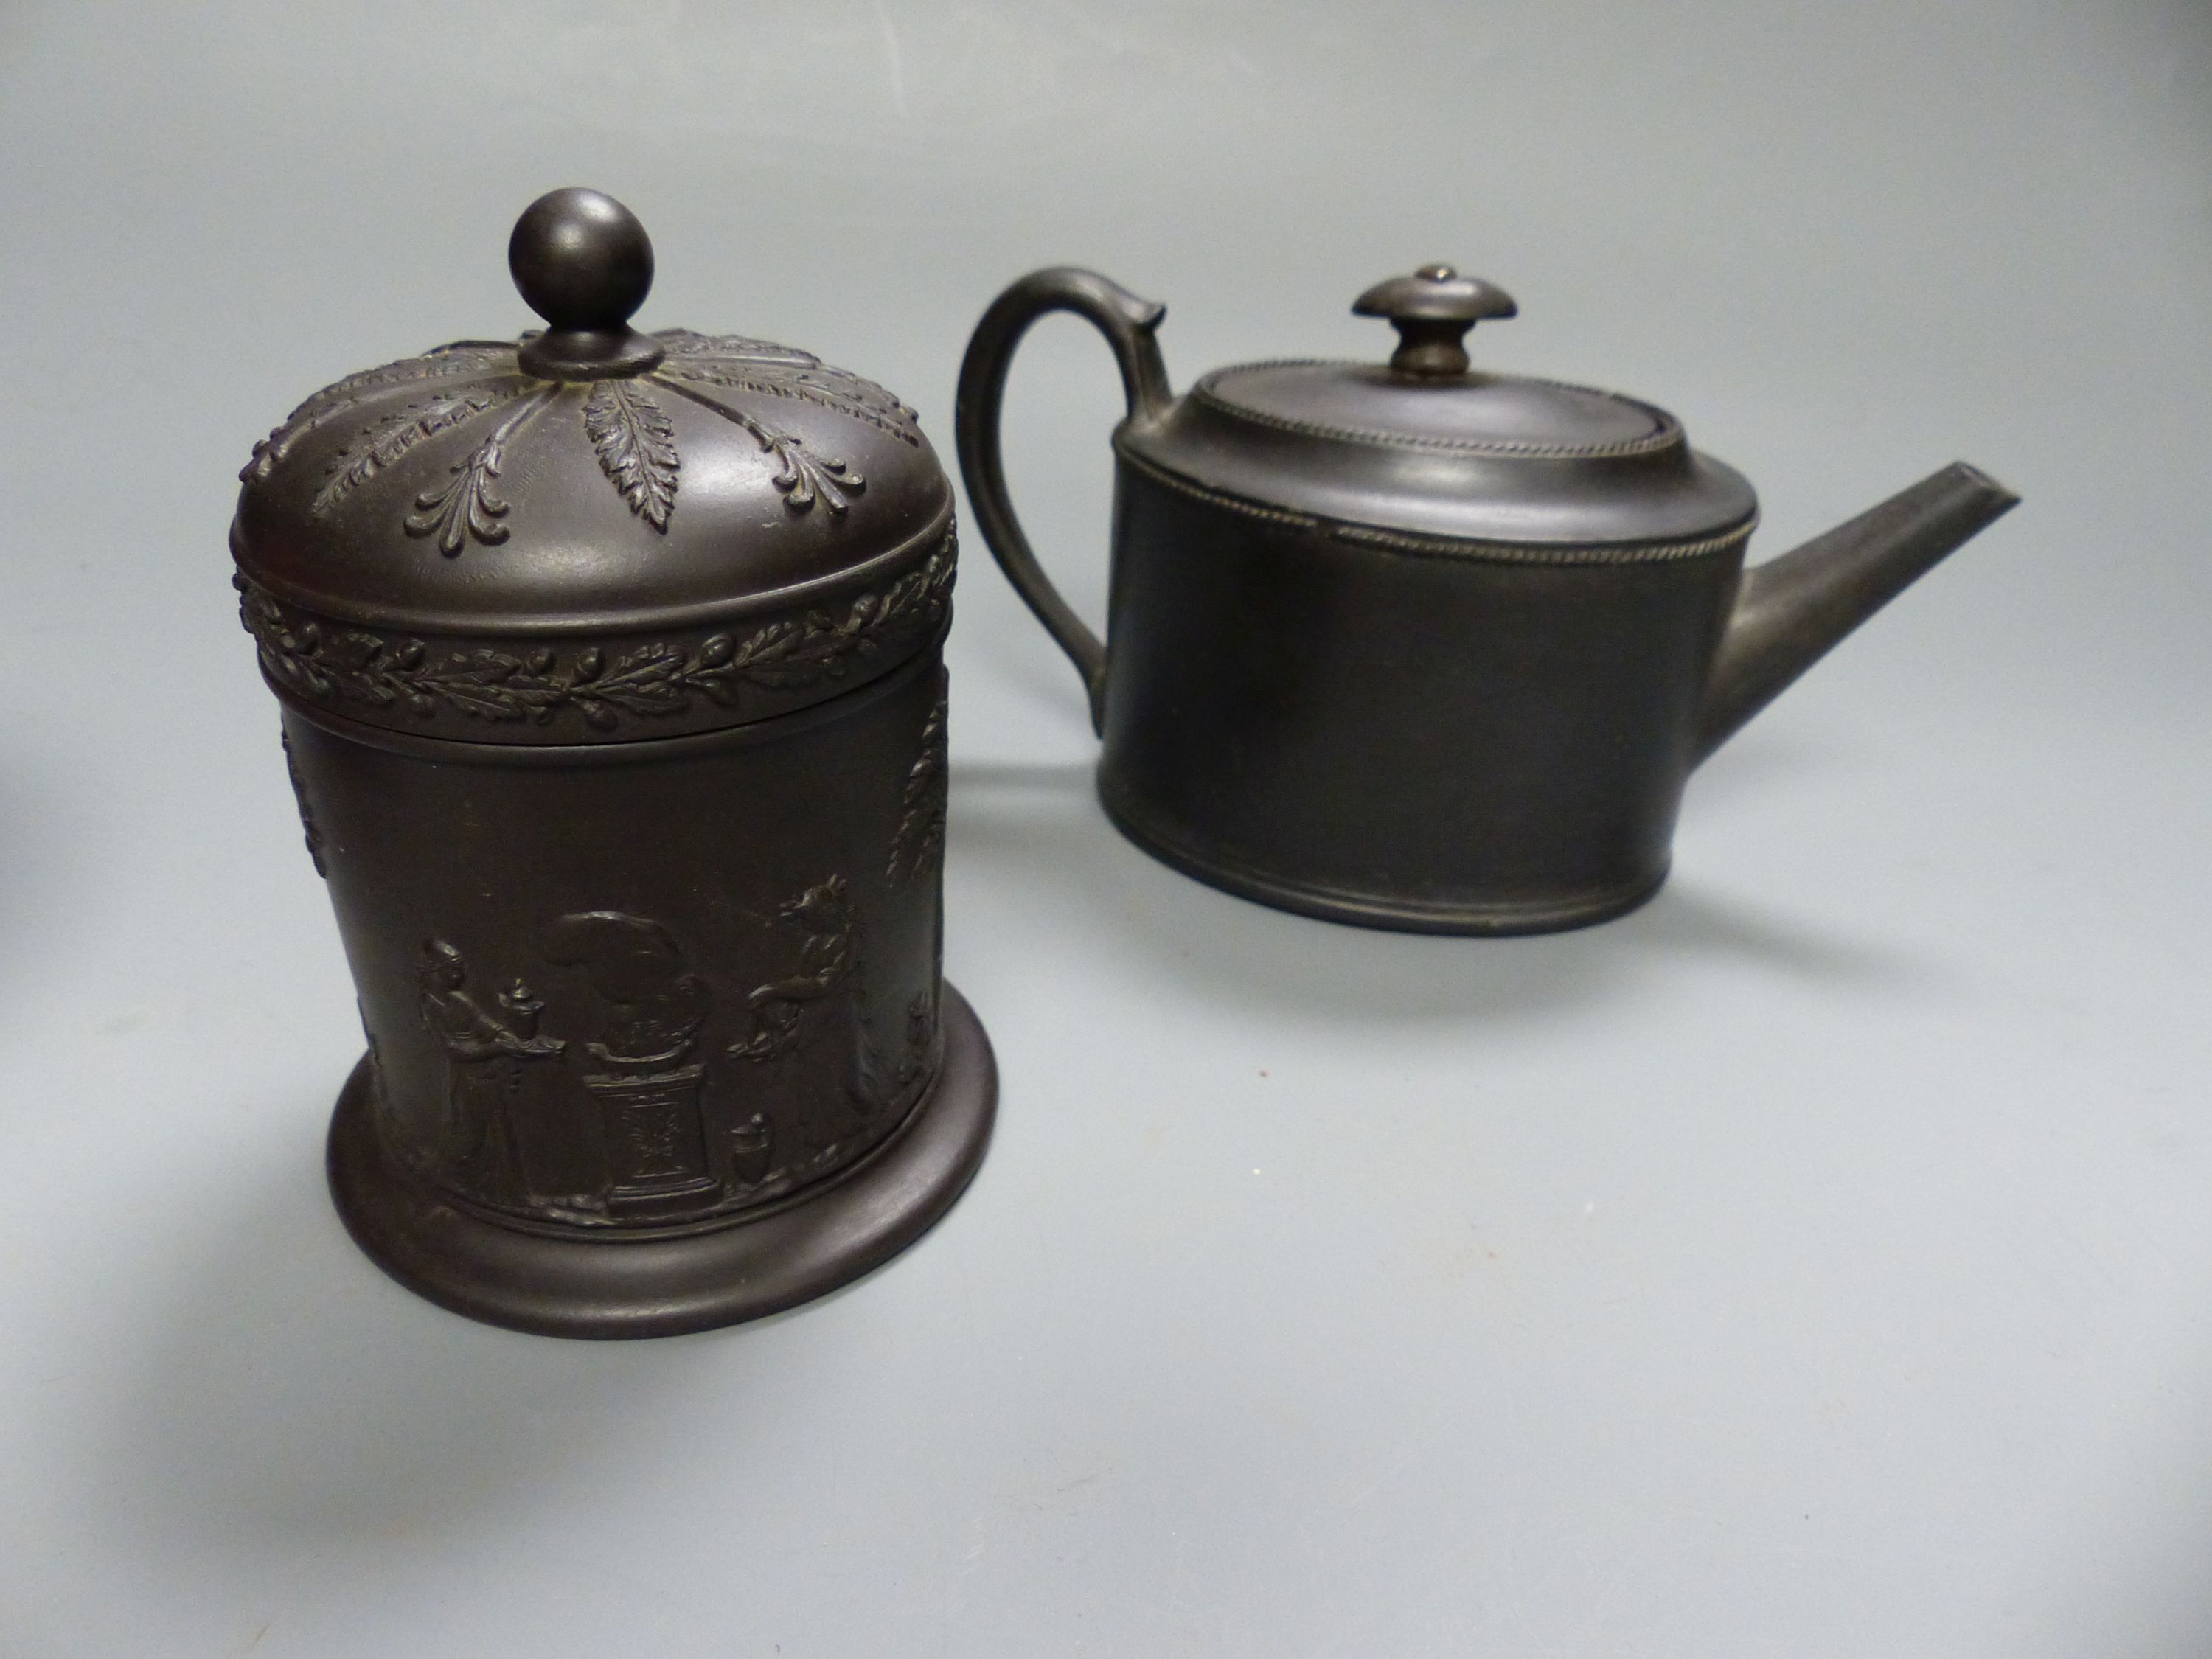 A Chinese Sang de Boeuf censer, a similar celadon glazed bowl, together with a Wedgwood black basalt teapot, c.1800 and a similar 20th